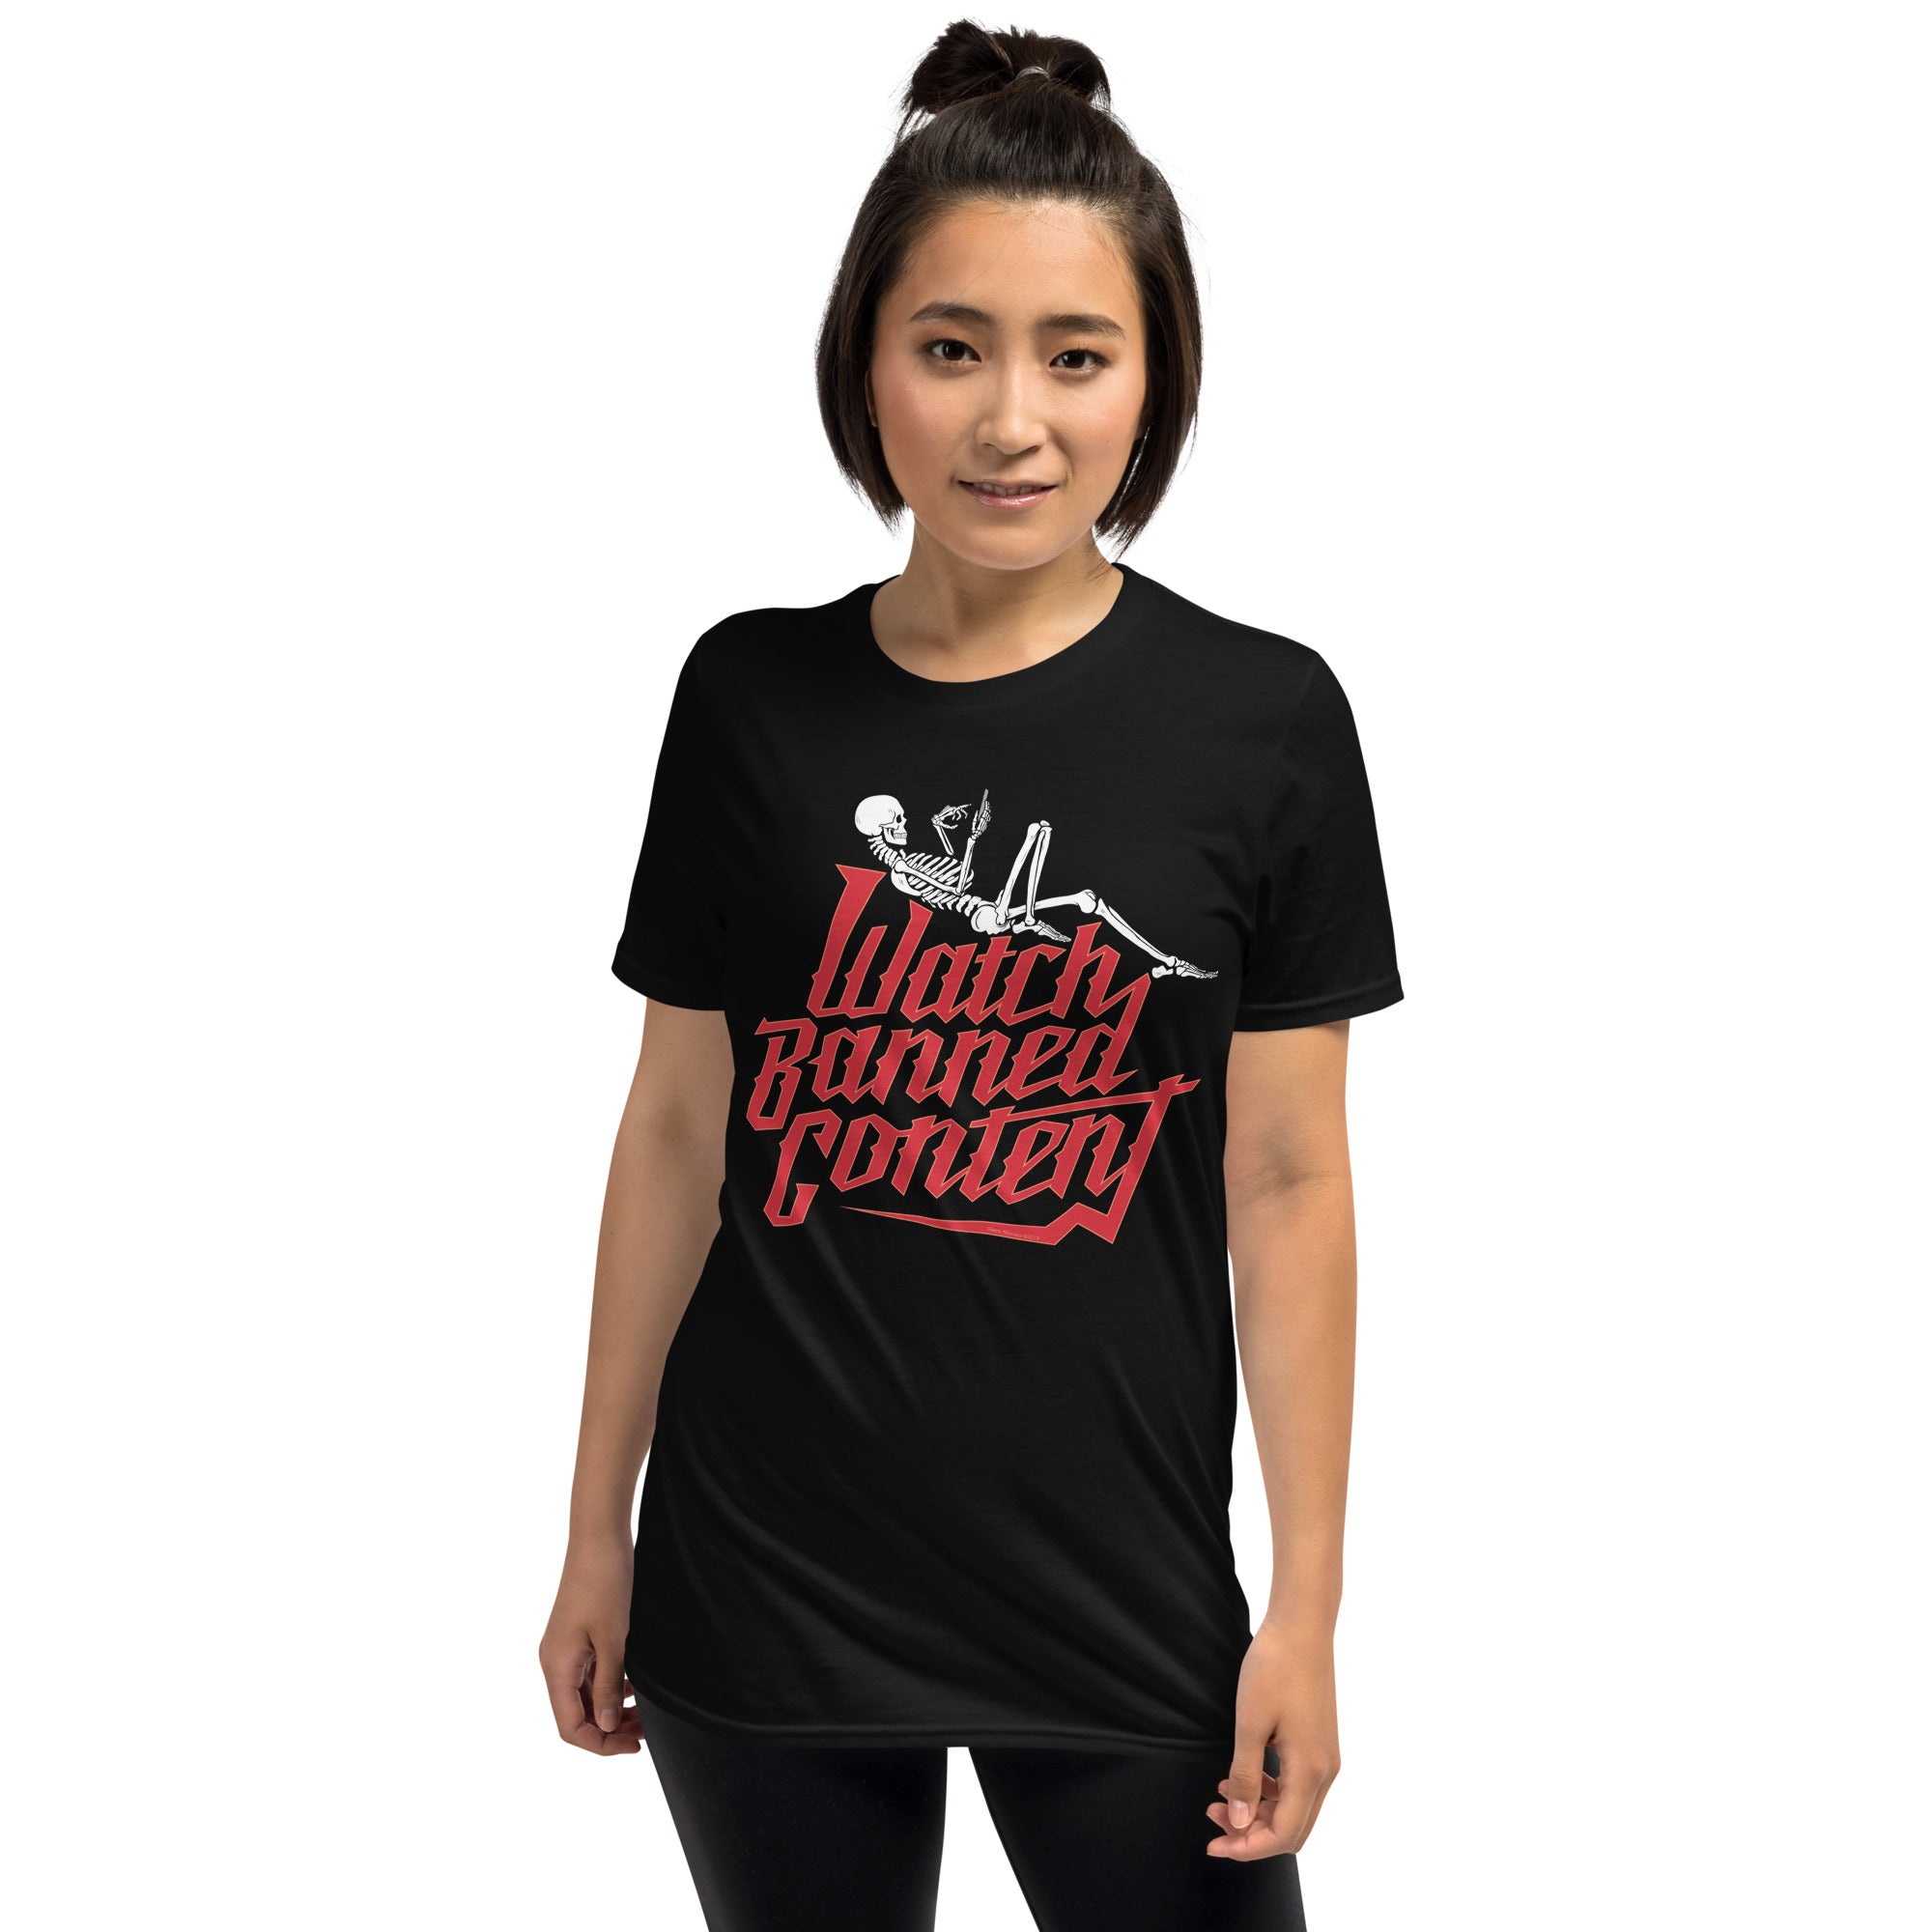 Watch Banned Content T-Shirt